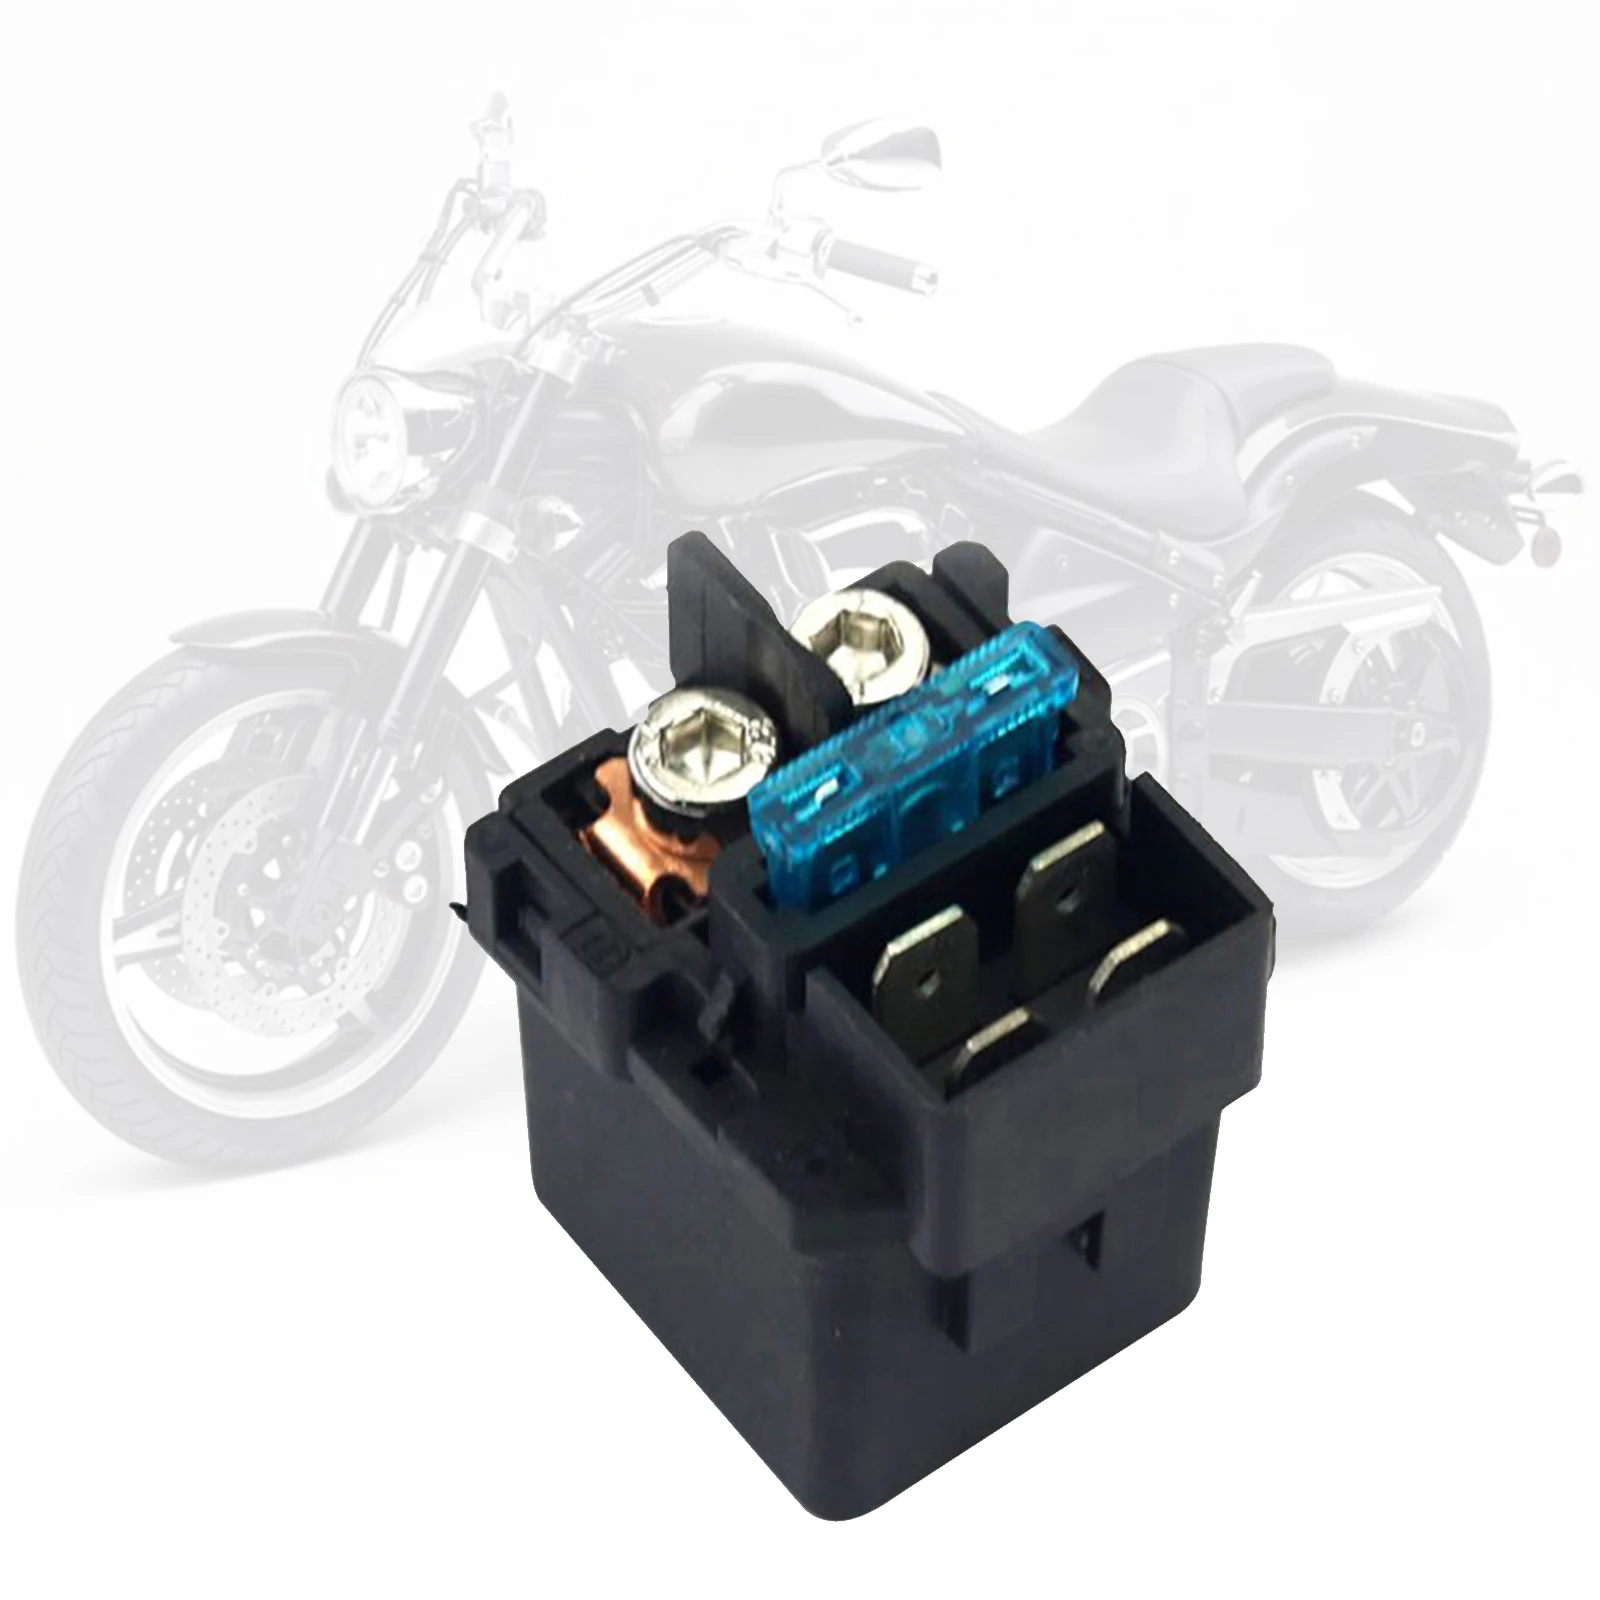 FZ16 Starter Relay Solenoid Voltage Starter Relay for Yamaha FZ 16 FZ-16 YS150 Motorcycle Accessories ABS Plastic and Metal